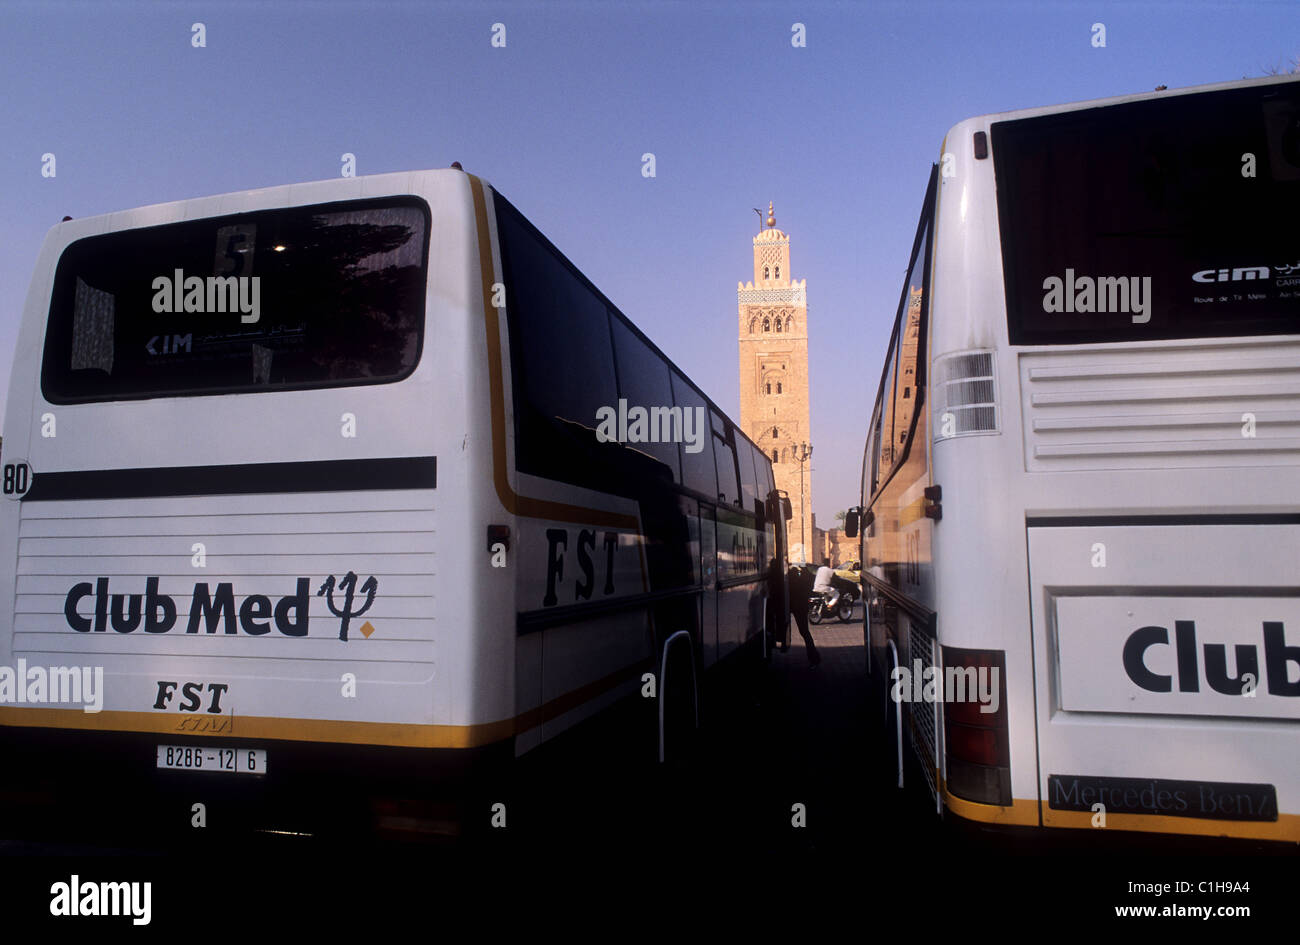 Morocco, Marrakesh, Club Med bus with Koutoubia mosque in background Stock Photo